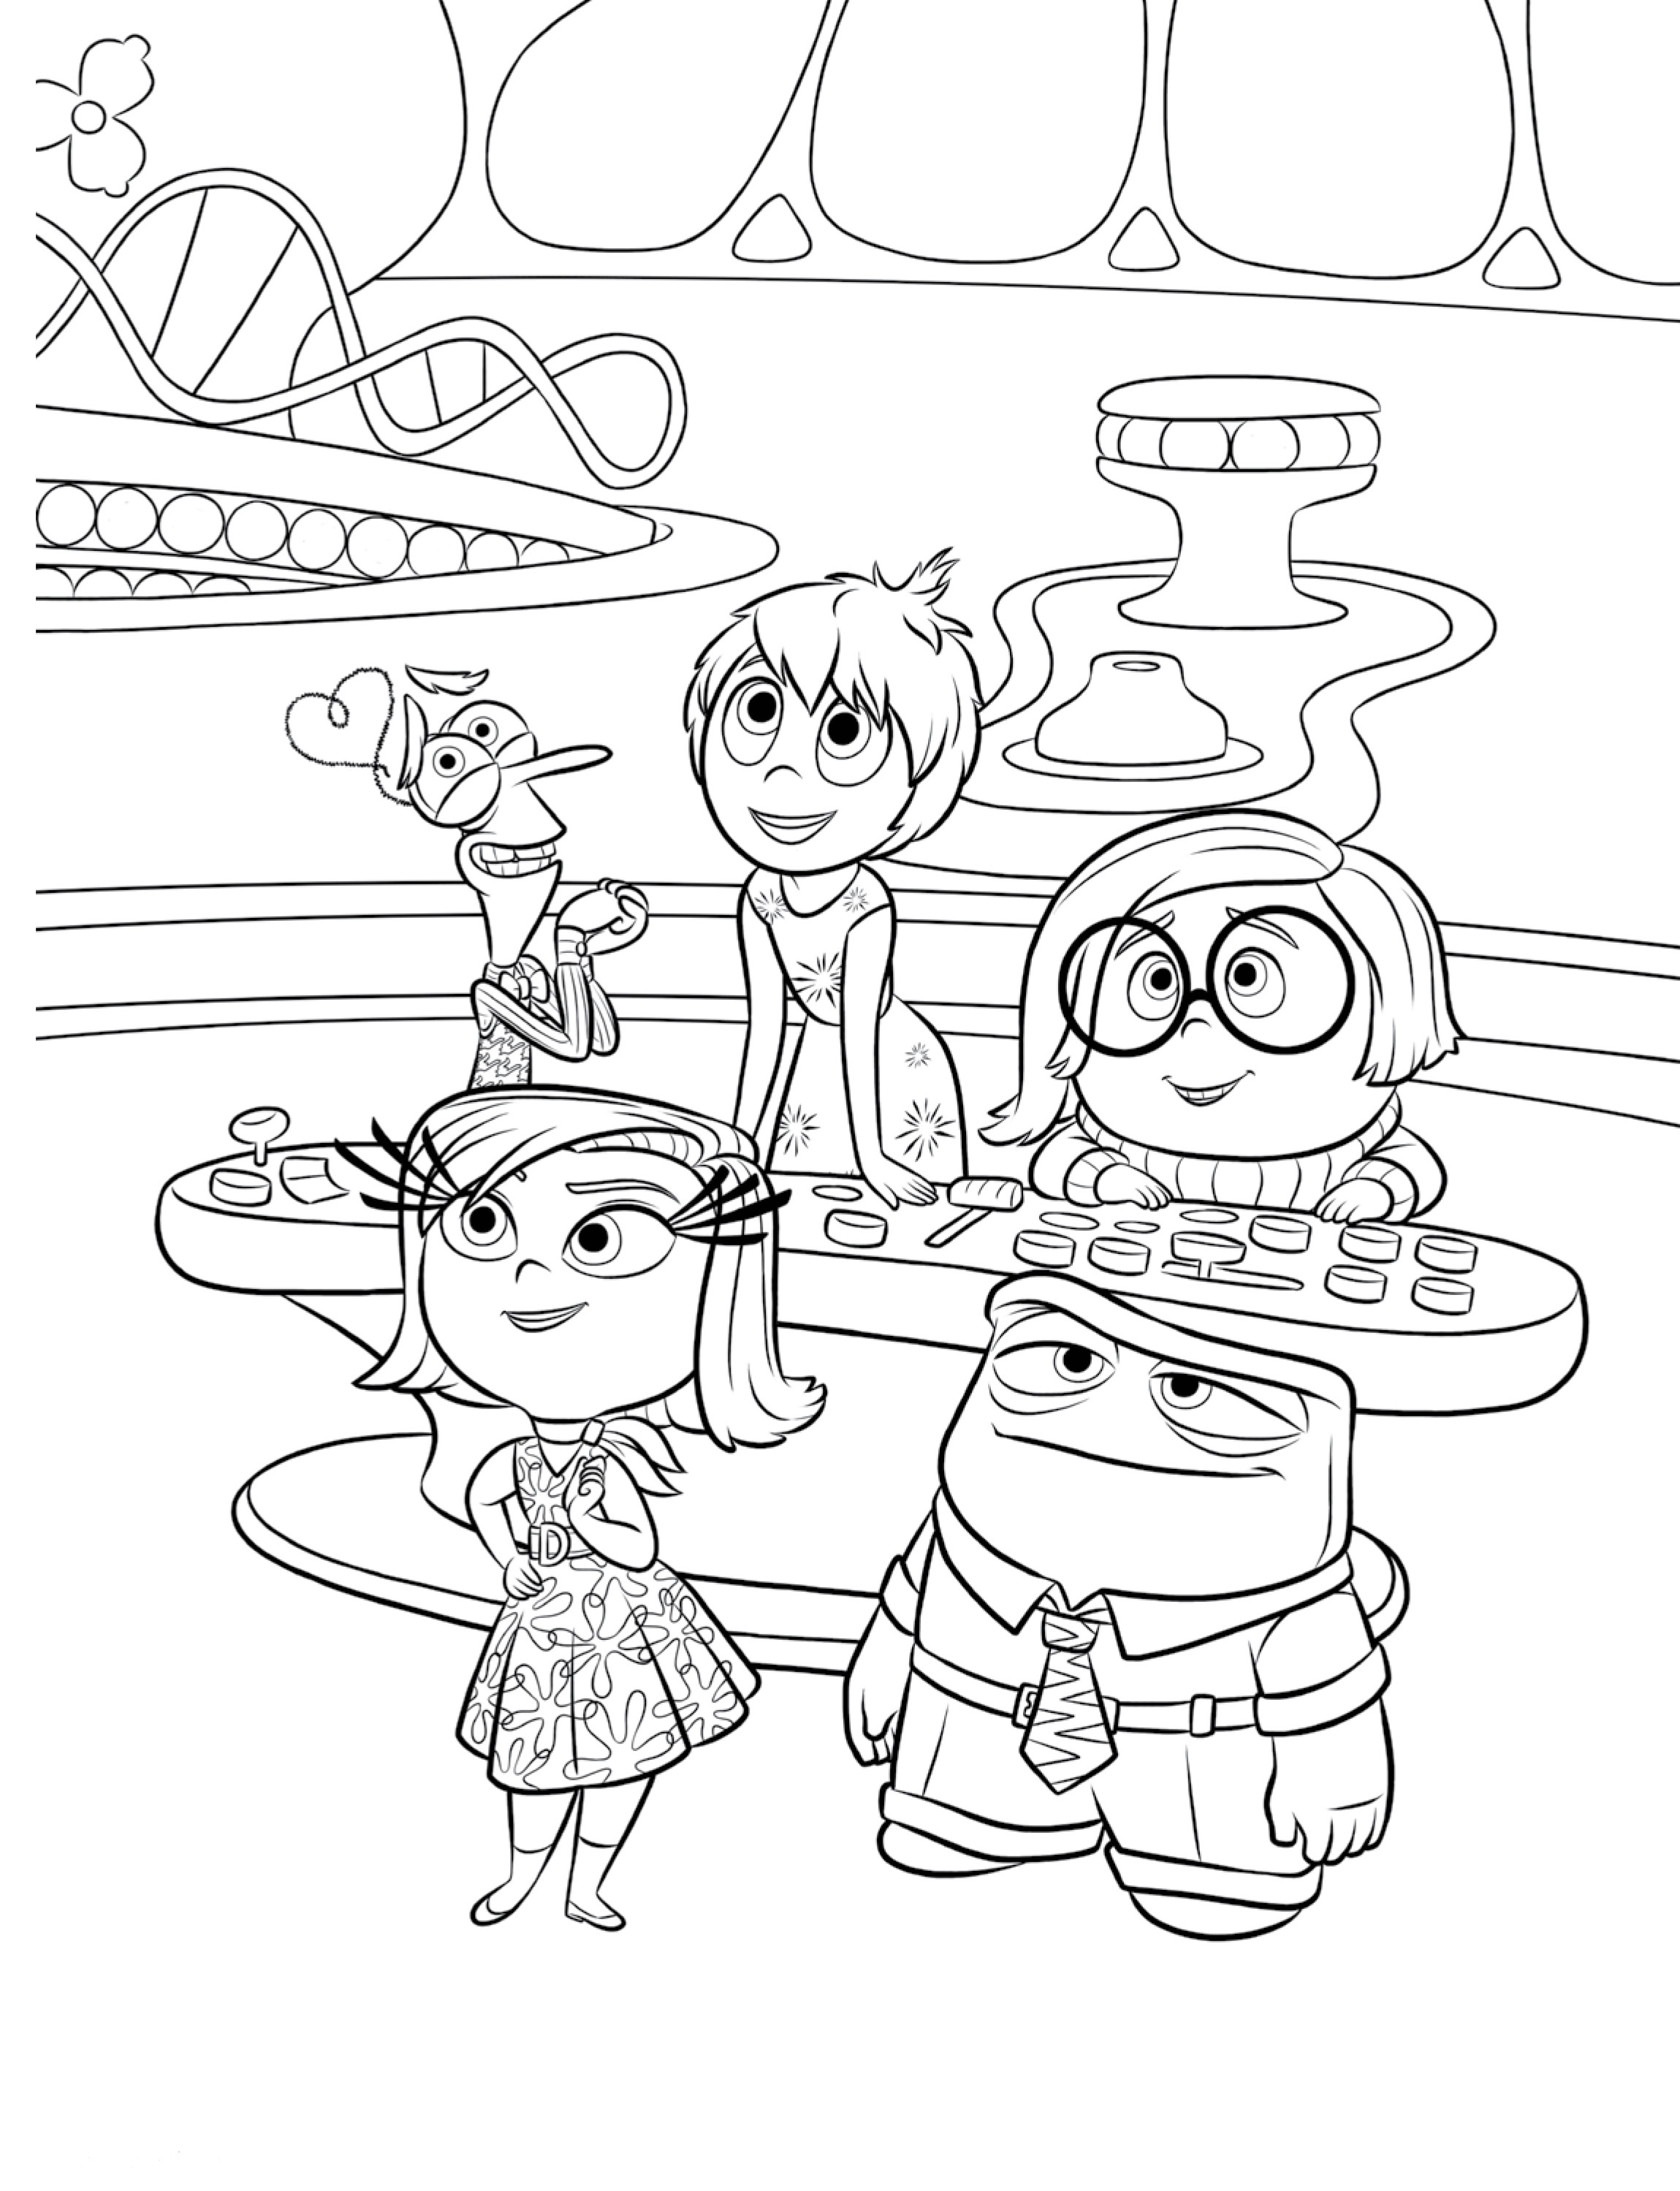 Coloring Books Printouts
 Inside Out Coloring Pages Best Coloring Pages For Kids